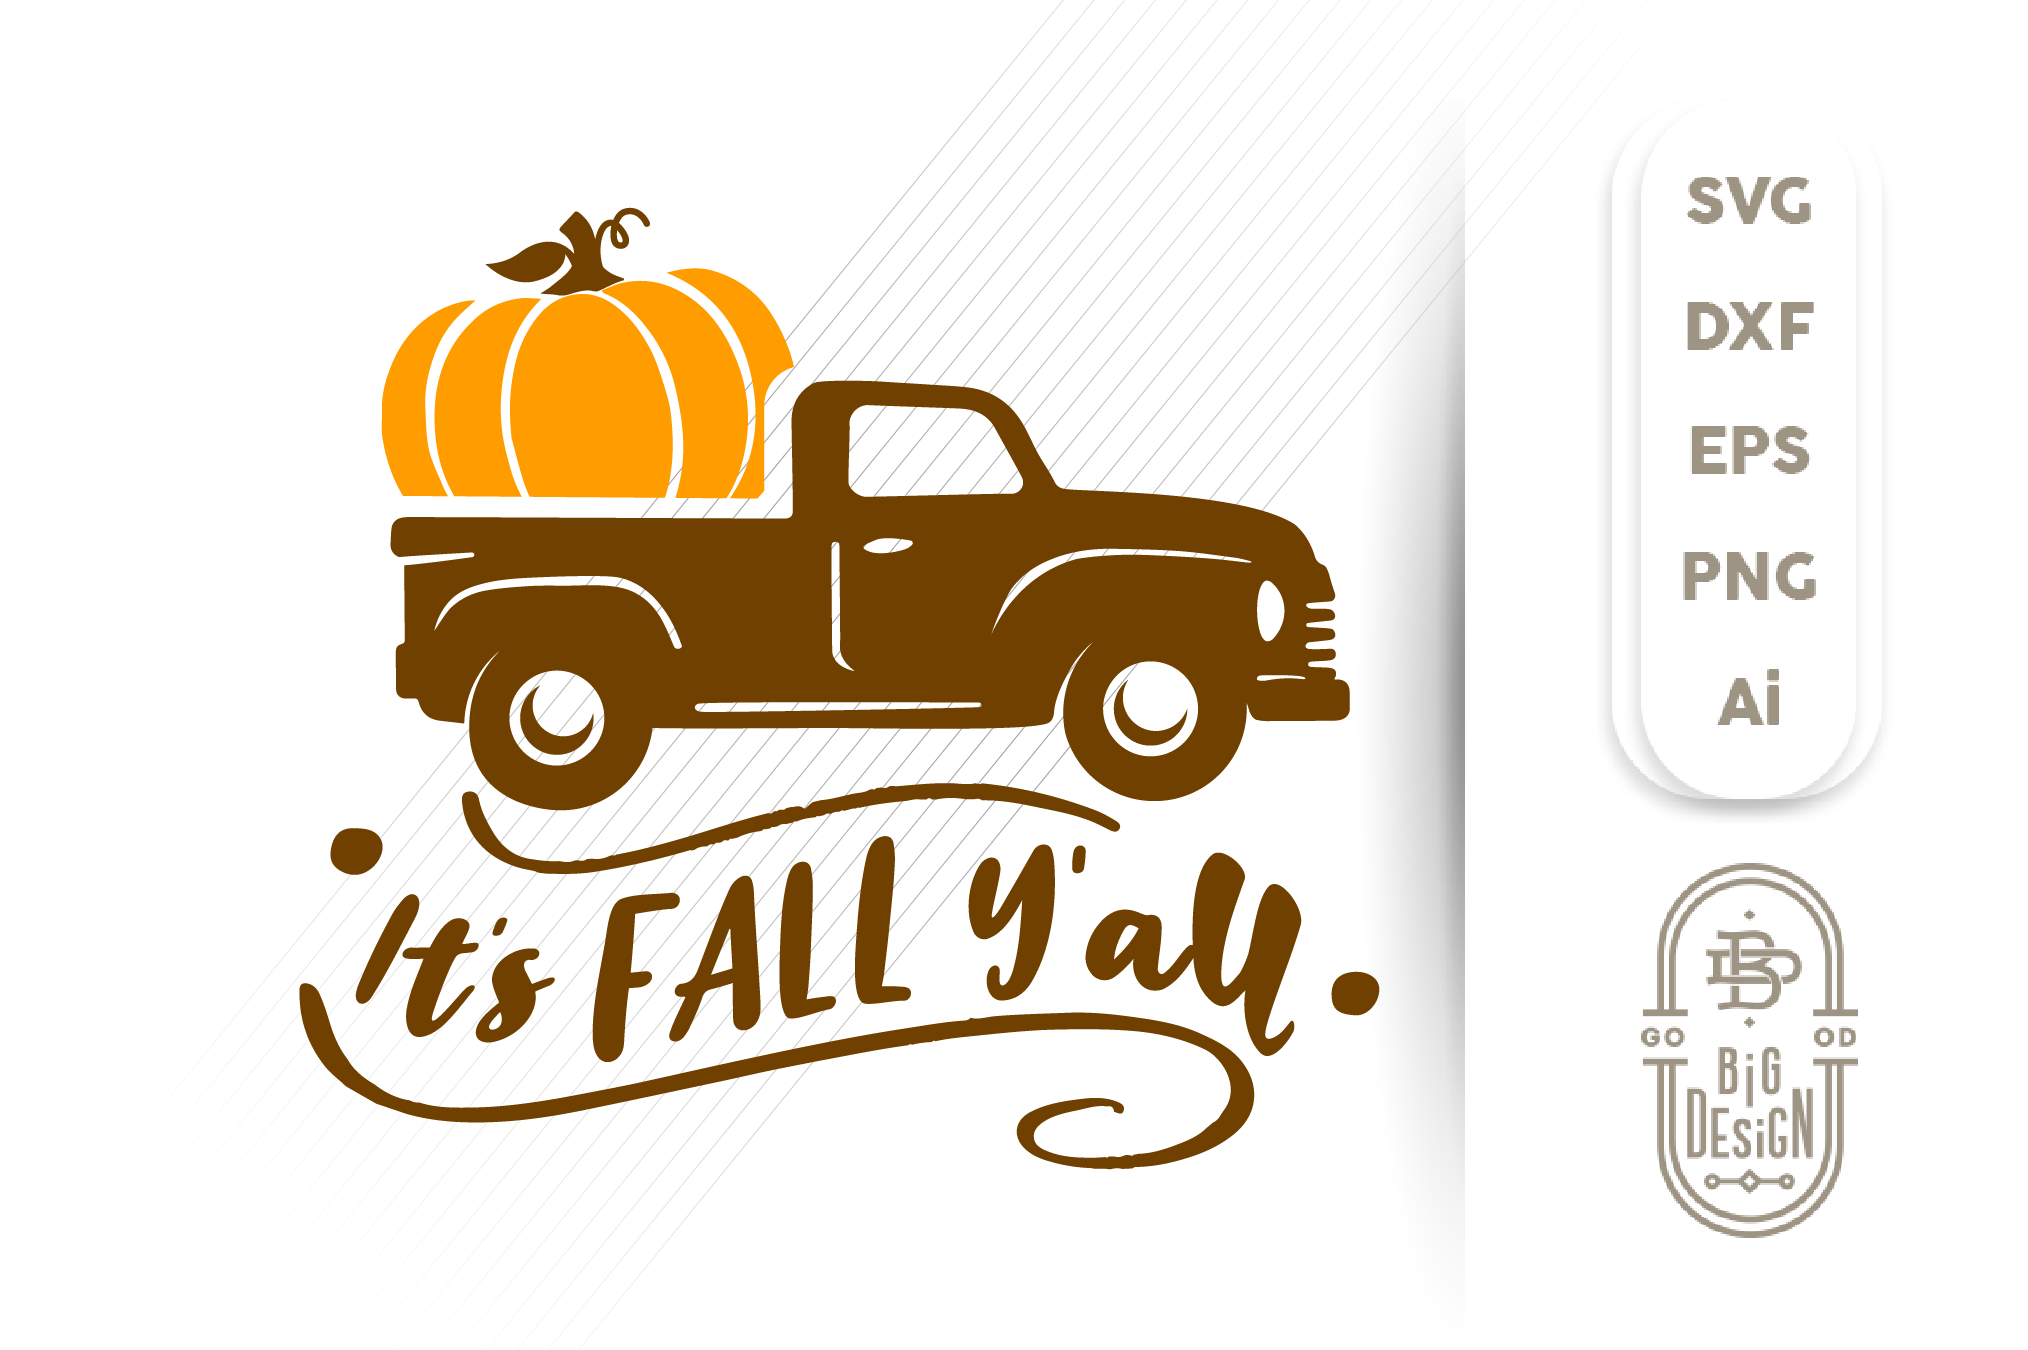 Download Fall Shirt Svg Silhouette Image Fall Svg Halloween Shirt Svg It S Fall Y All Svg Pumpkin Svg Home Hobby Craft Supplies Tools